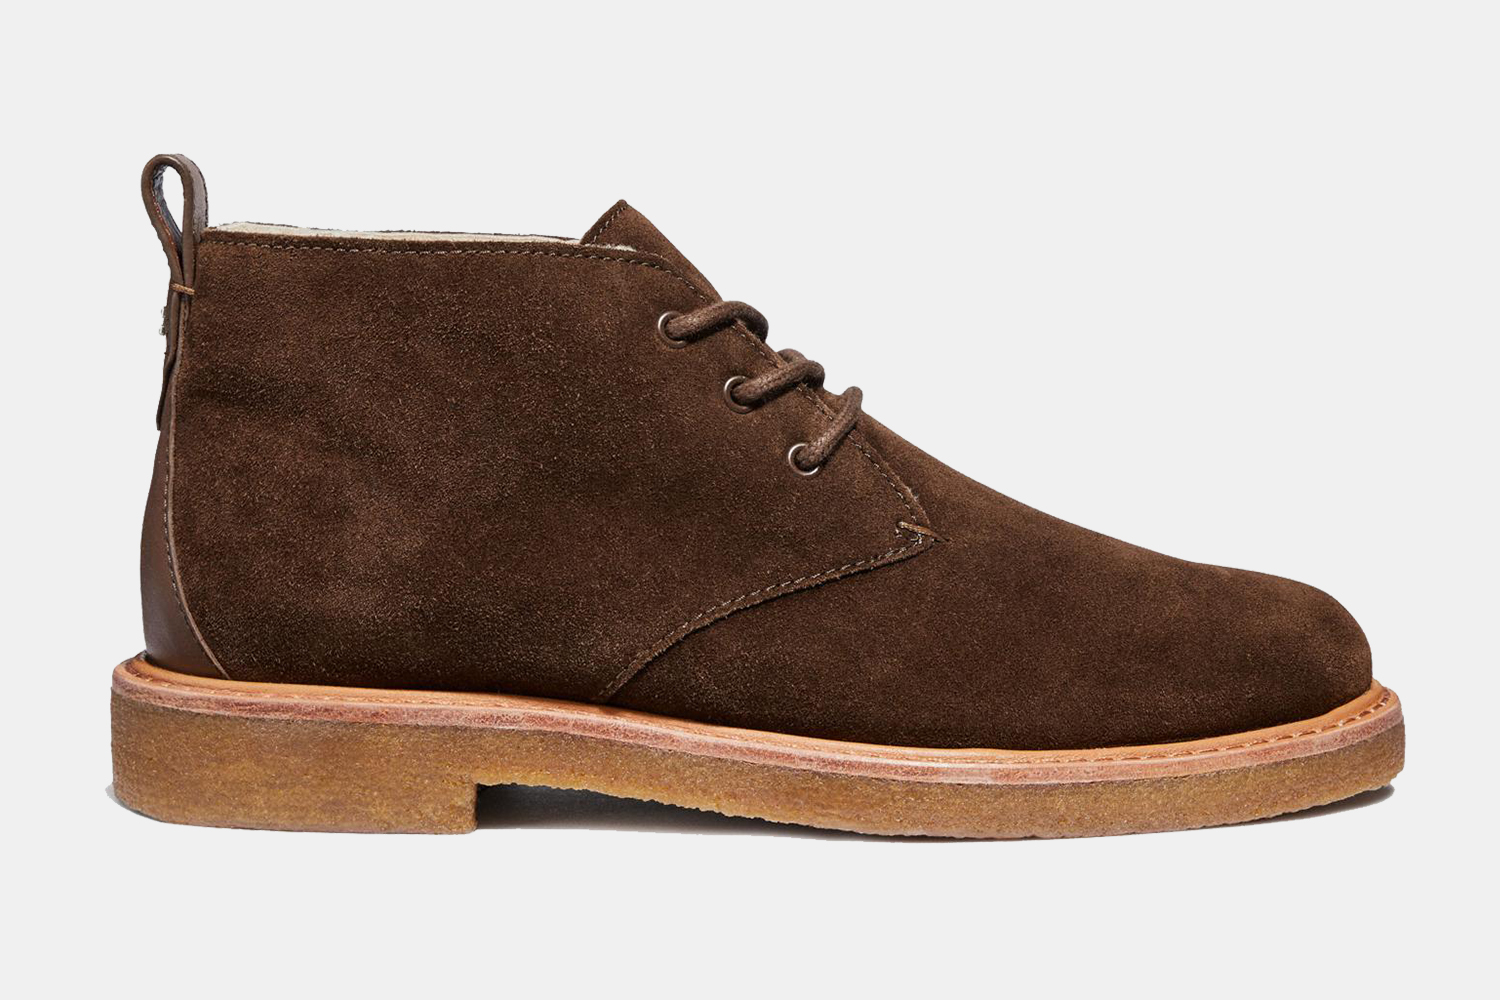 Coach Men's Boots, Wallets and Bags Are All on Sale - InsideHook